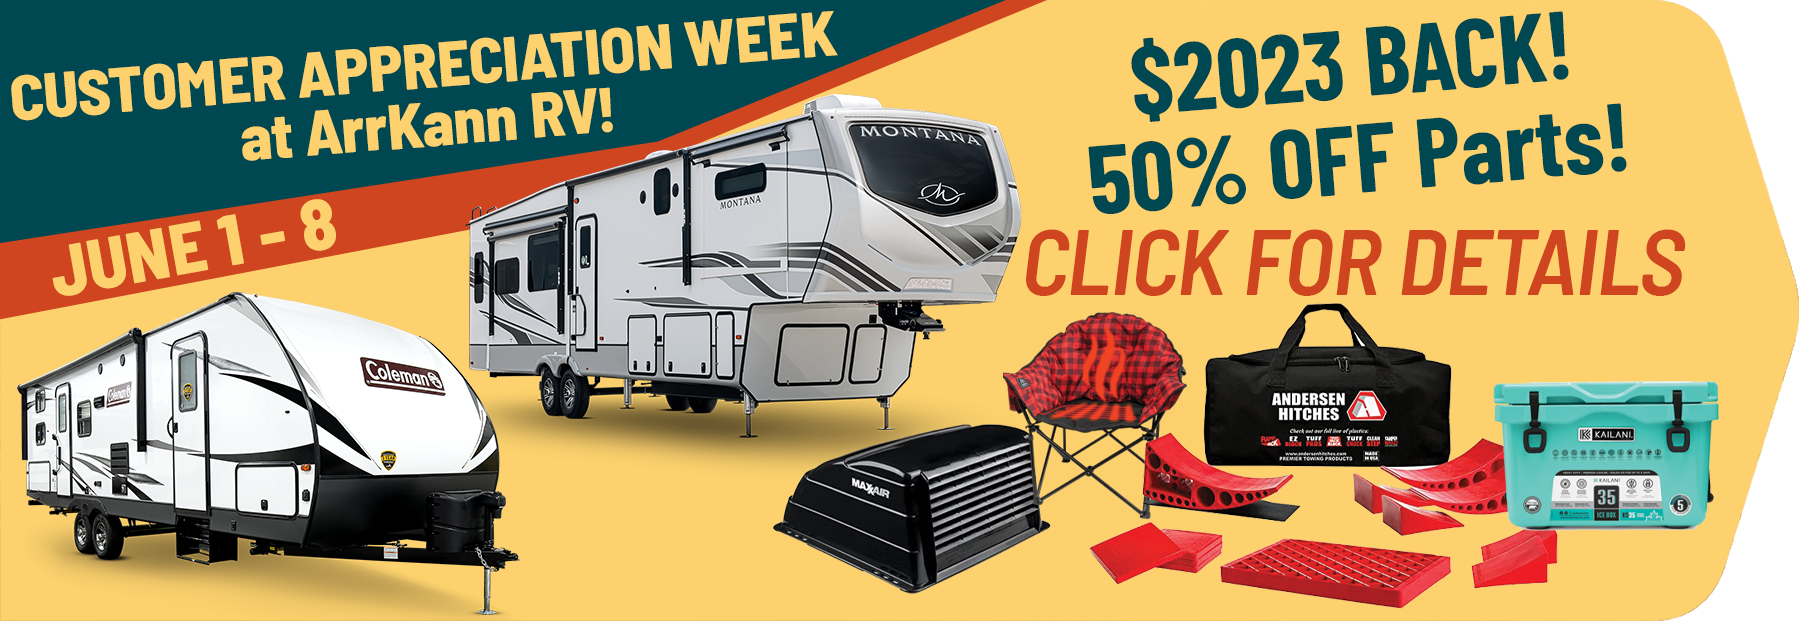 Fifth Wheel Promotion